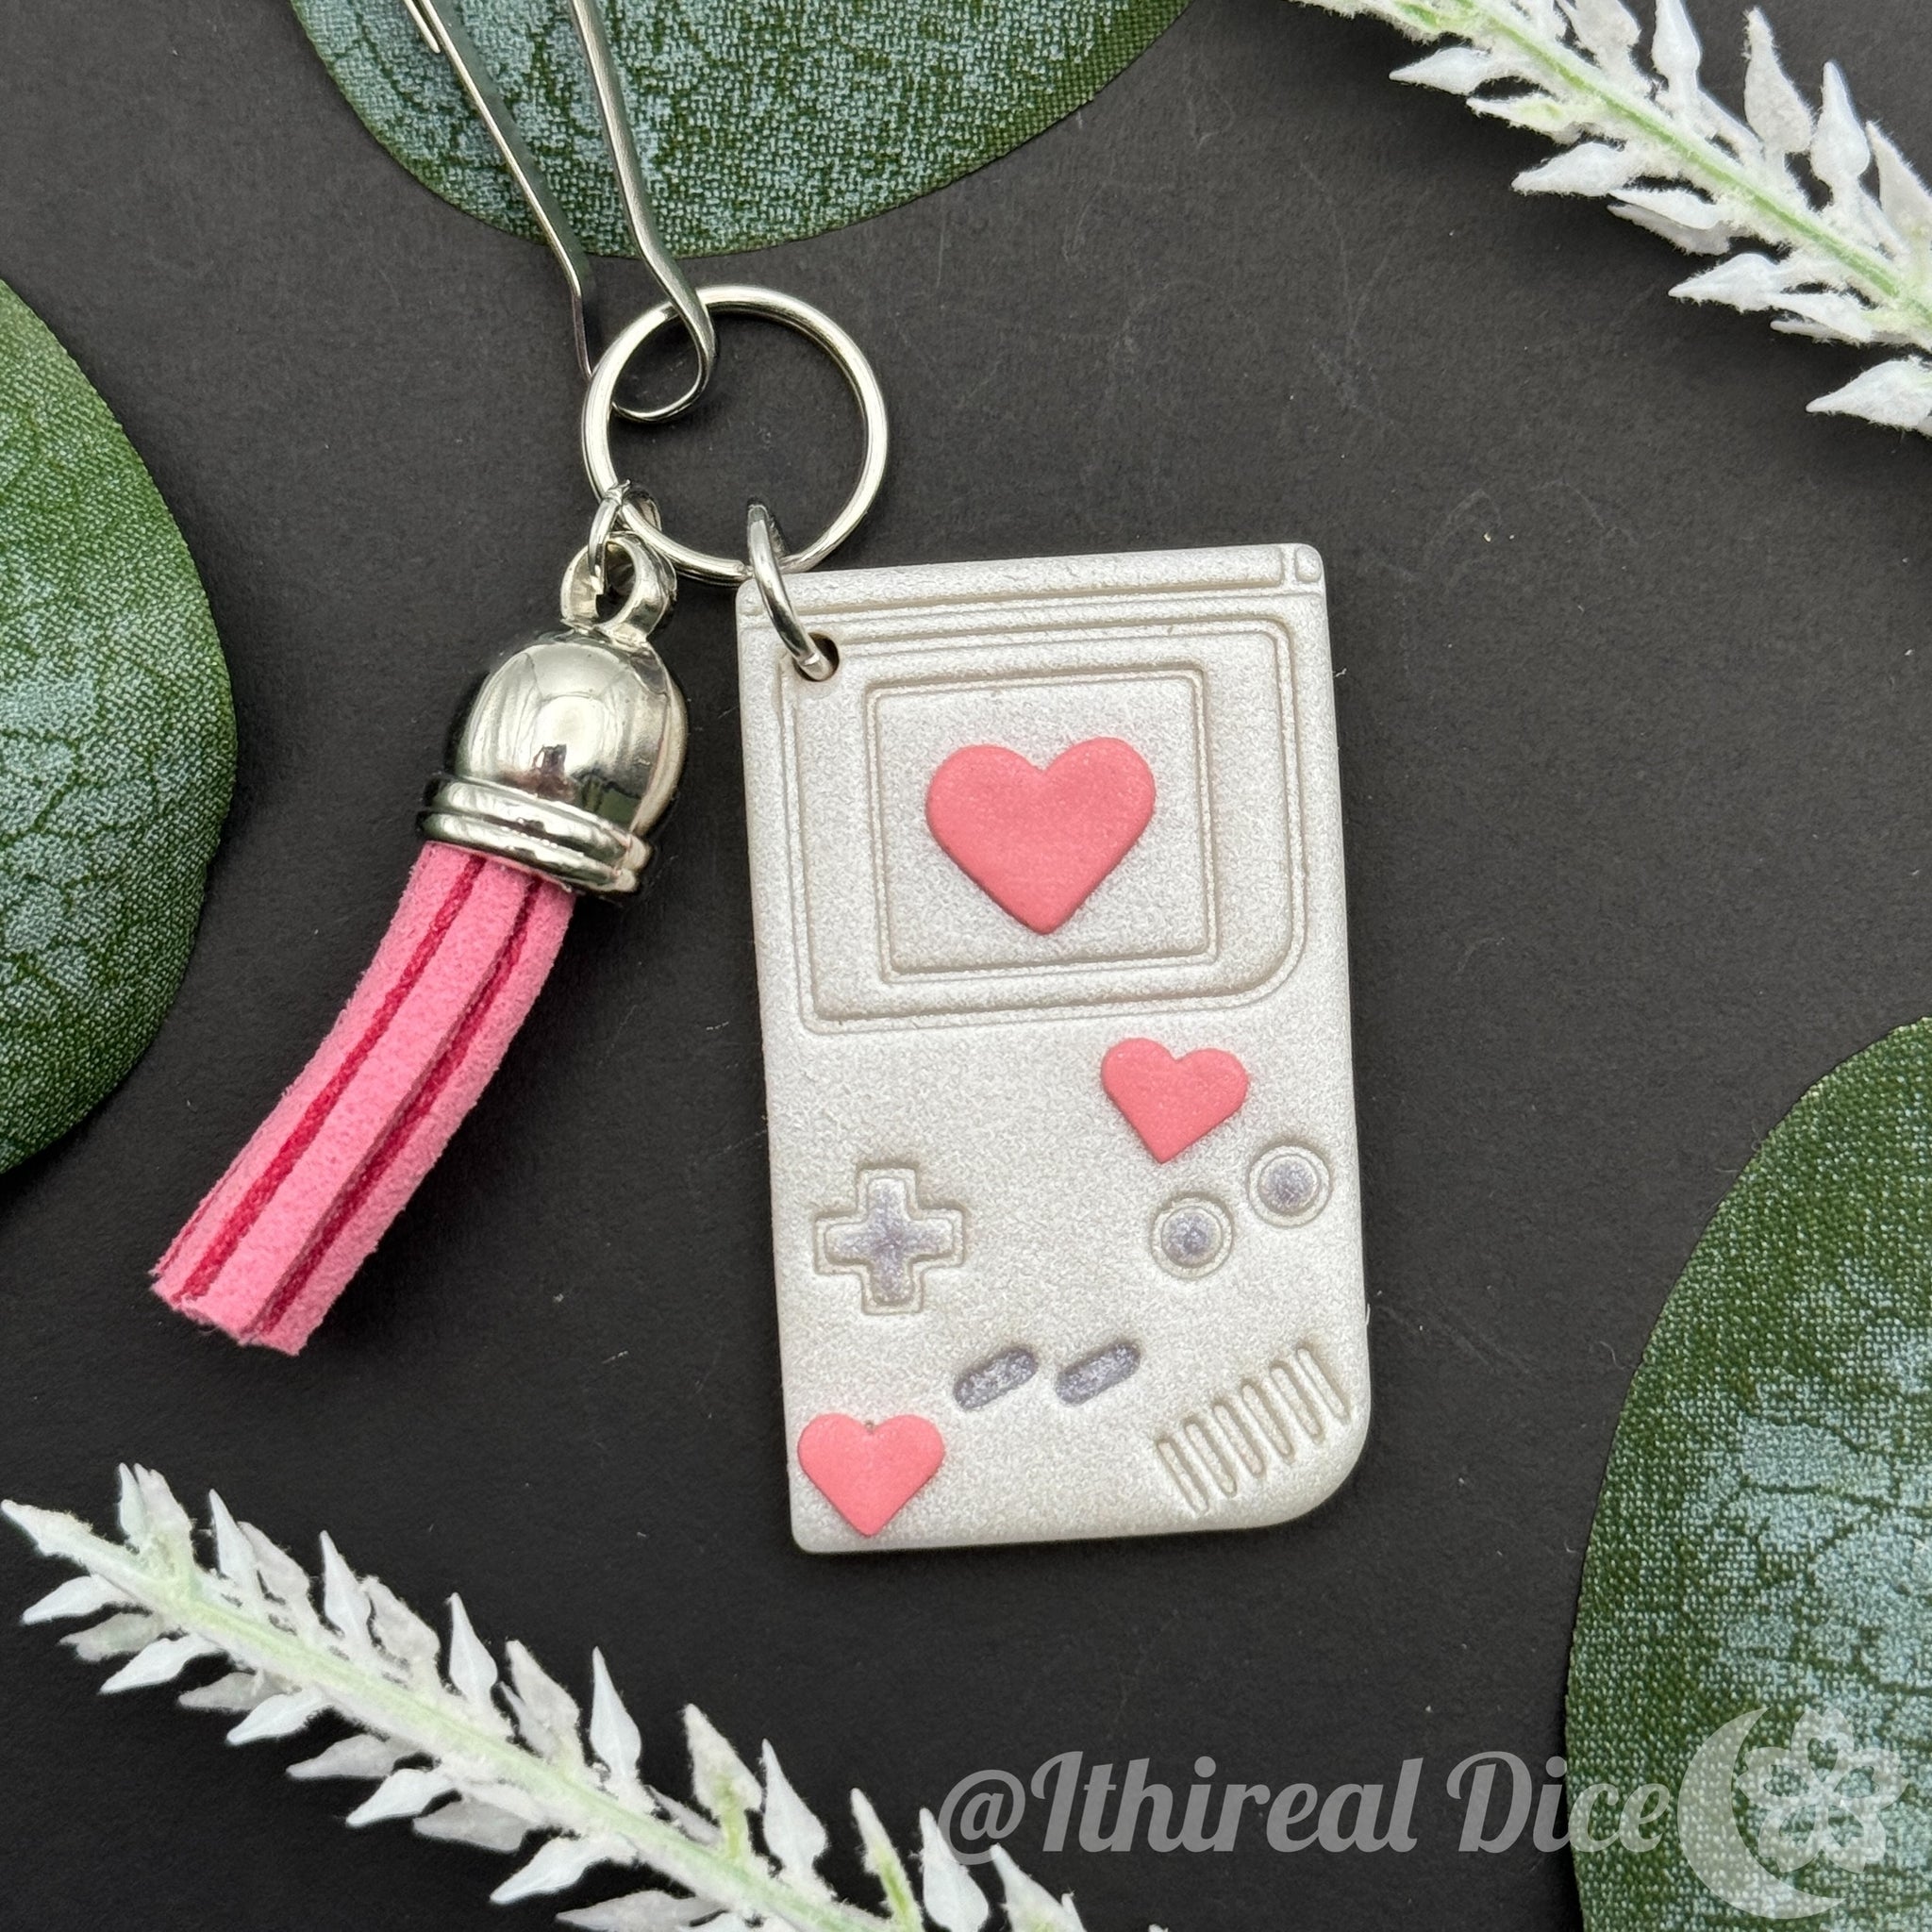 Keychain - Handheld Gamer (colour variants available)